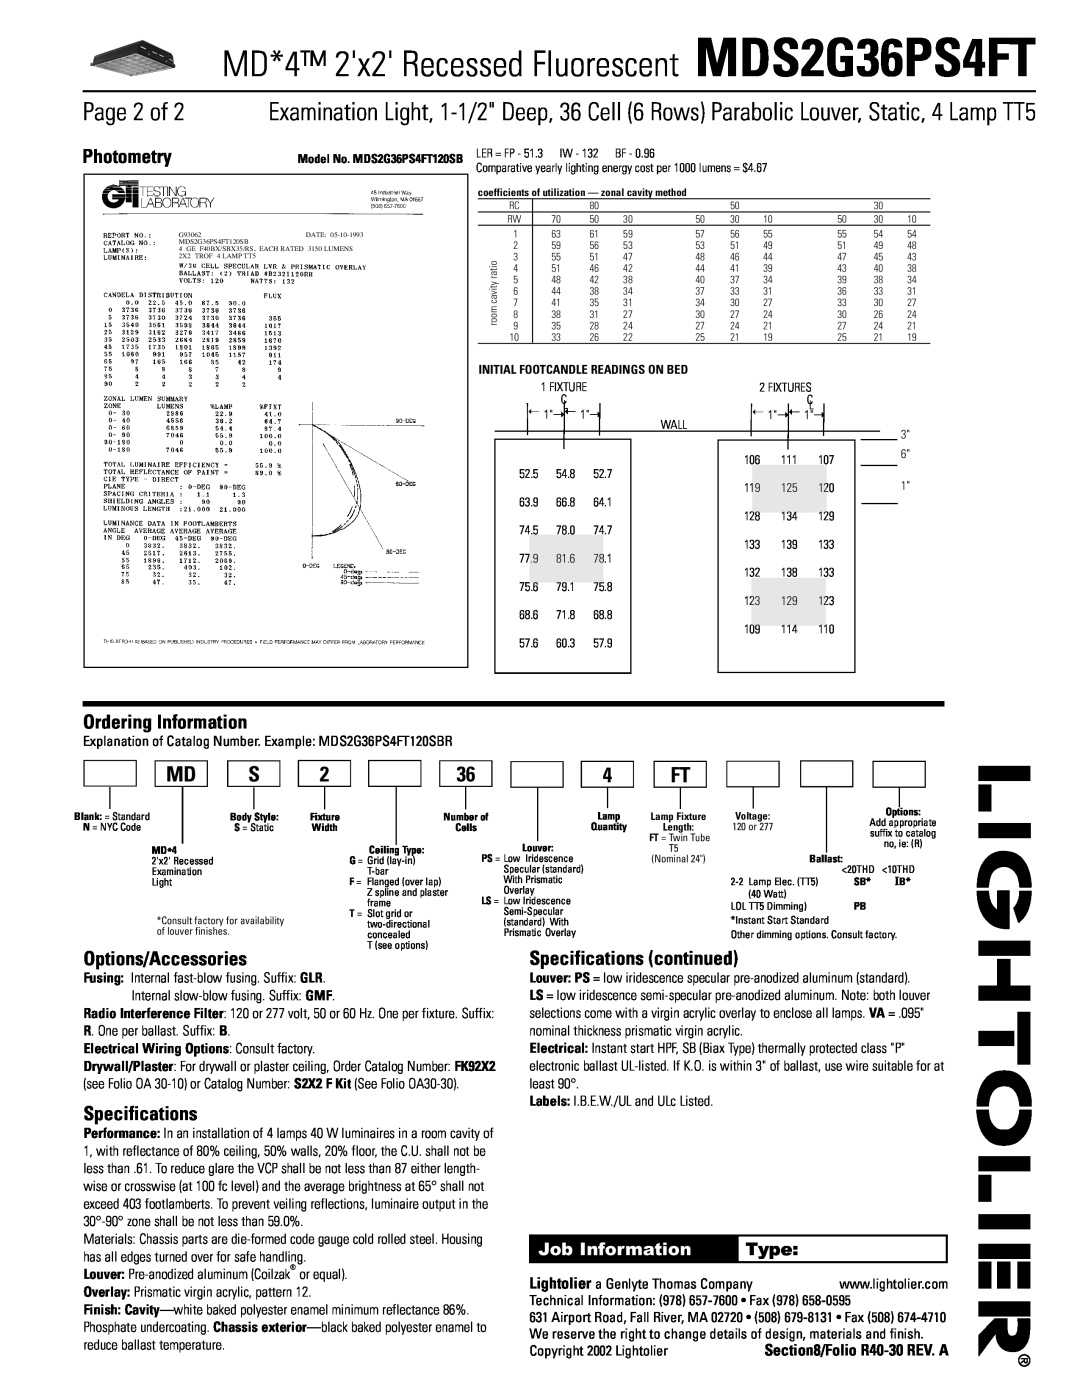 Lightolier MDS2G36PS4FT Page 2 of, Photometry, Ordering Information, Options/Accessories, Specifications continued, Type 